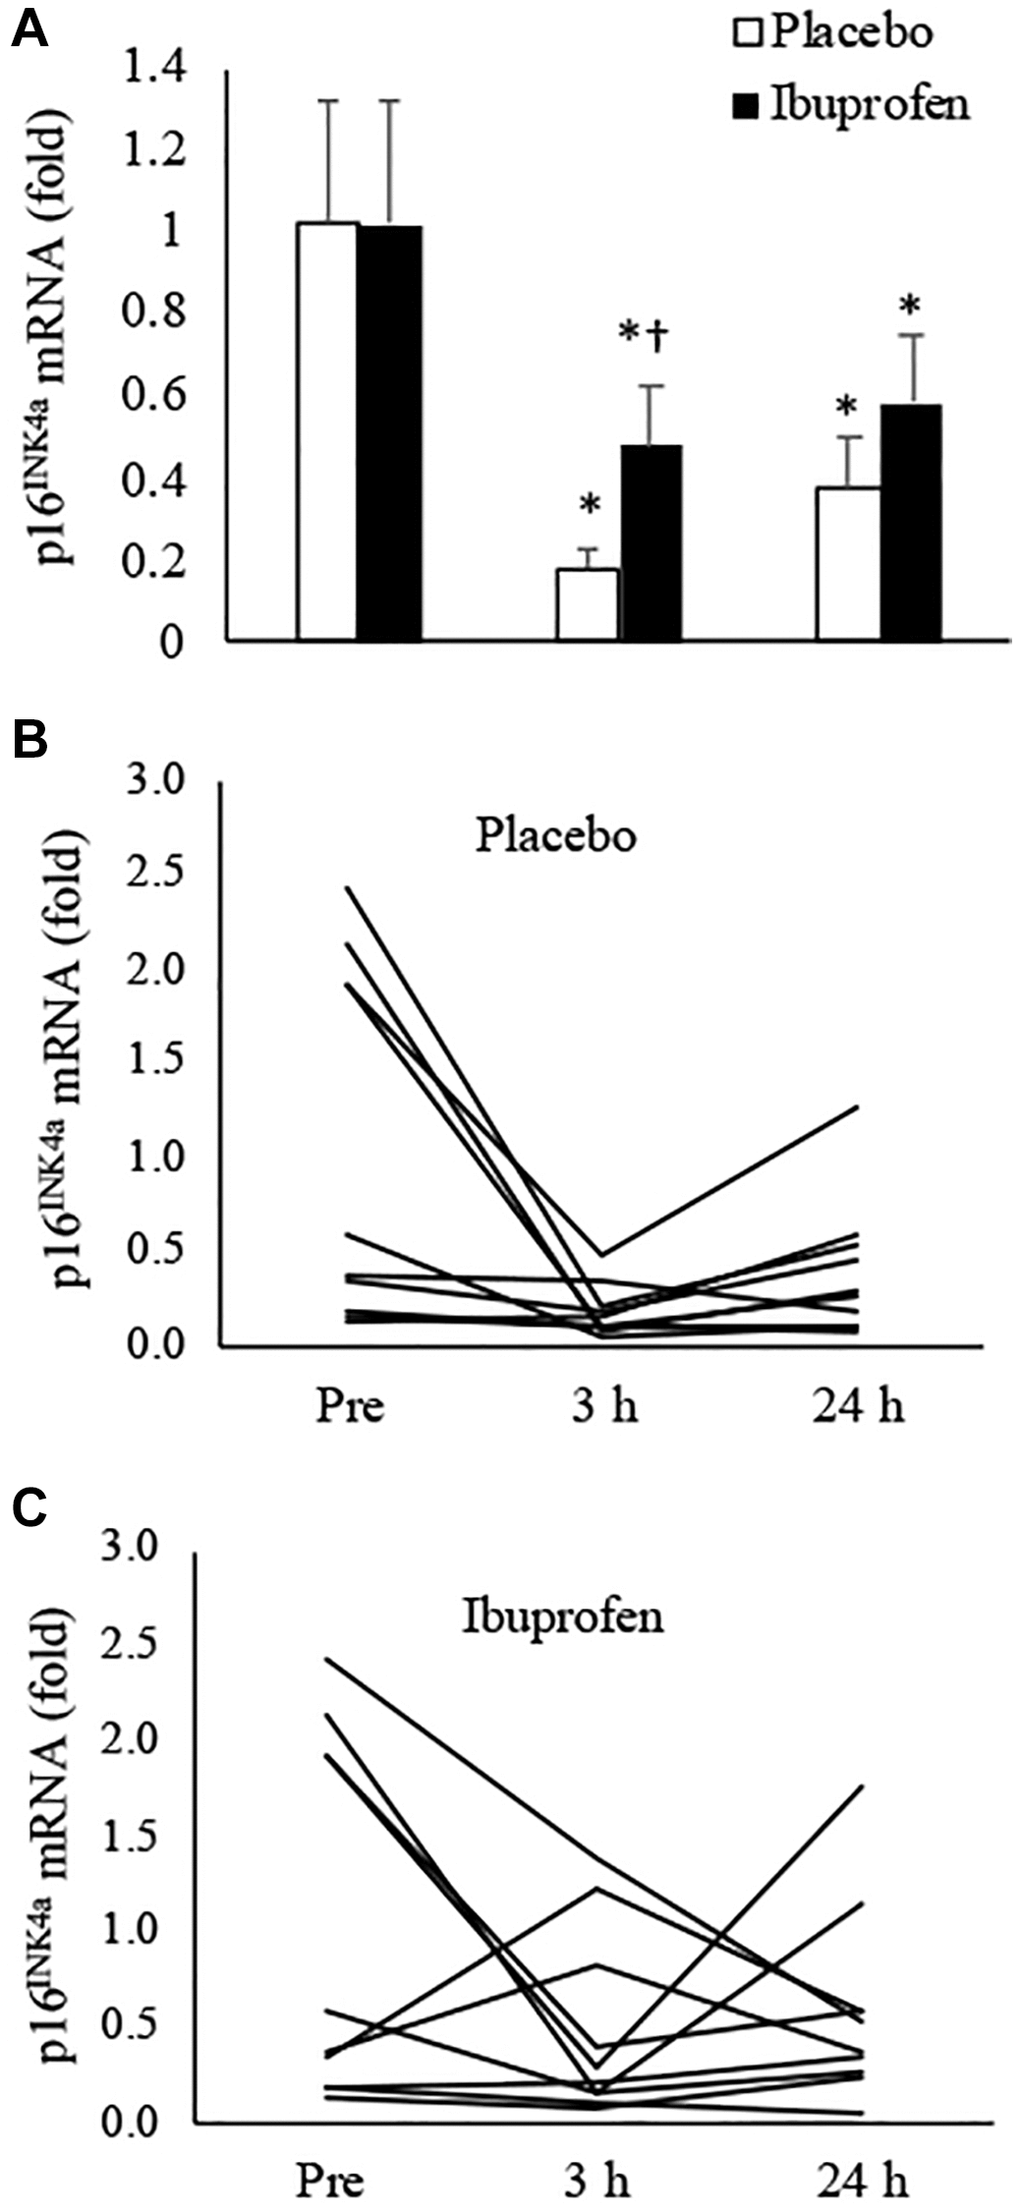 Effect of ibuprofen on p16INK4a expression in human skeletal muscle after HIIE. Decreased p16INK4a mRNA after HIIE was attenuated by ibuprofen administration (A). A wide individual variation of the exercise response was observed for both placebo (B) and ibuprofen (C) trials. †Denotes significant difference against placebo, p *denotes significant difference against Pre, p 